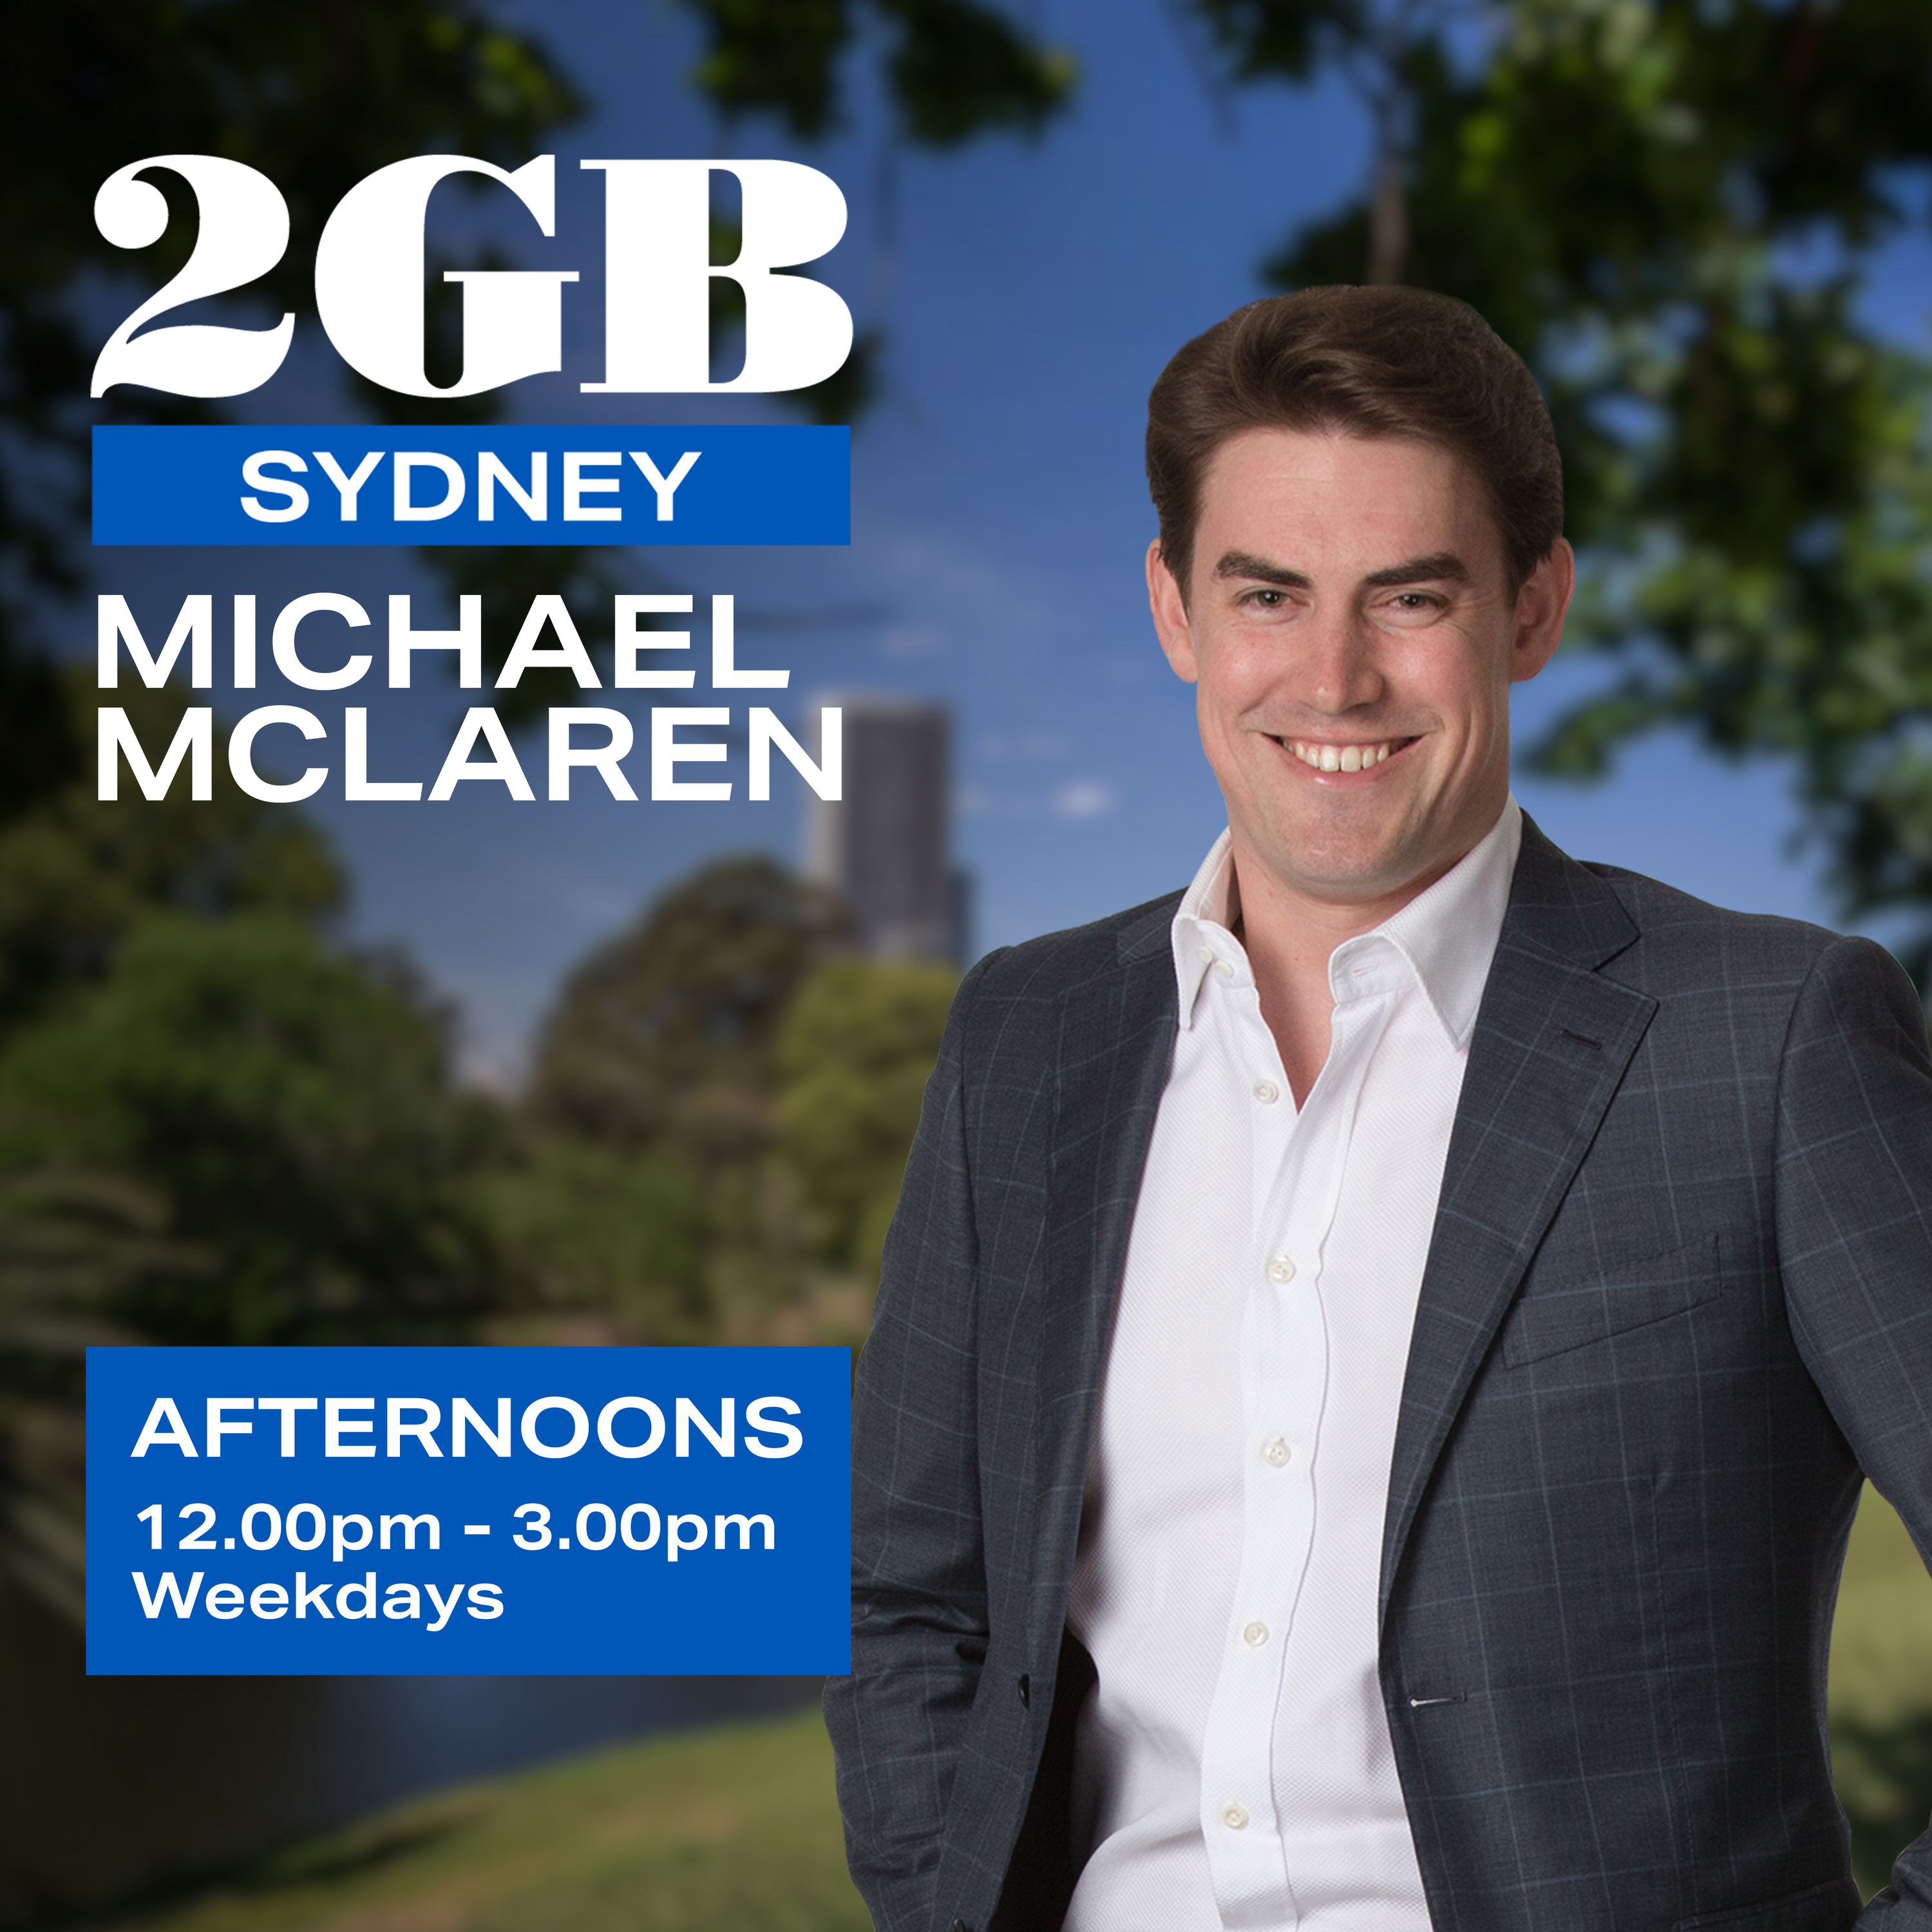 Afternoons with Michael McLaren - Thursday, 29th February